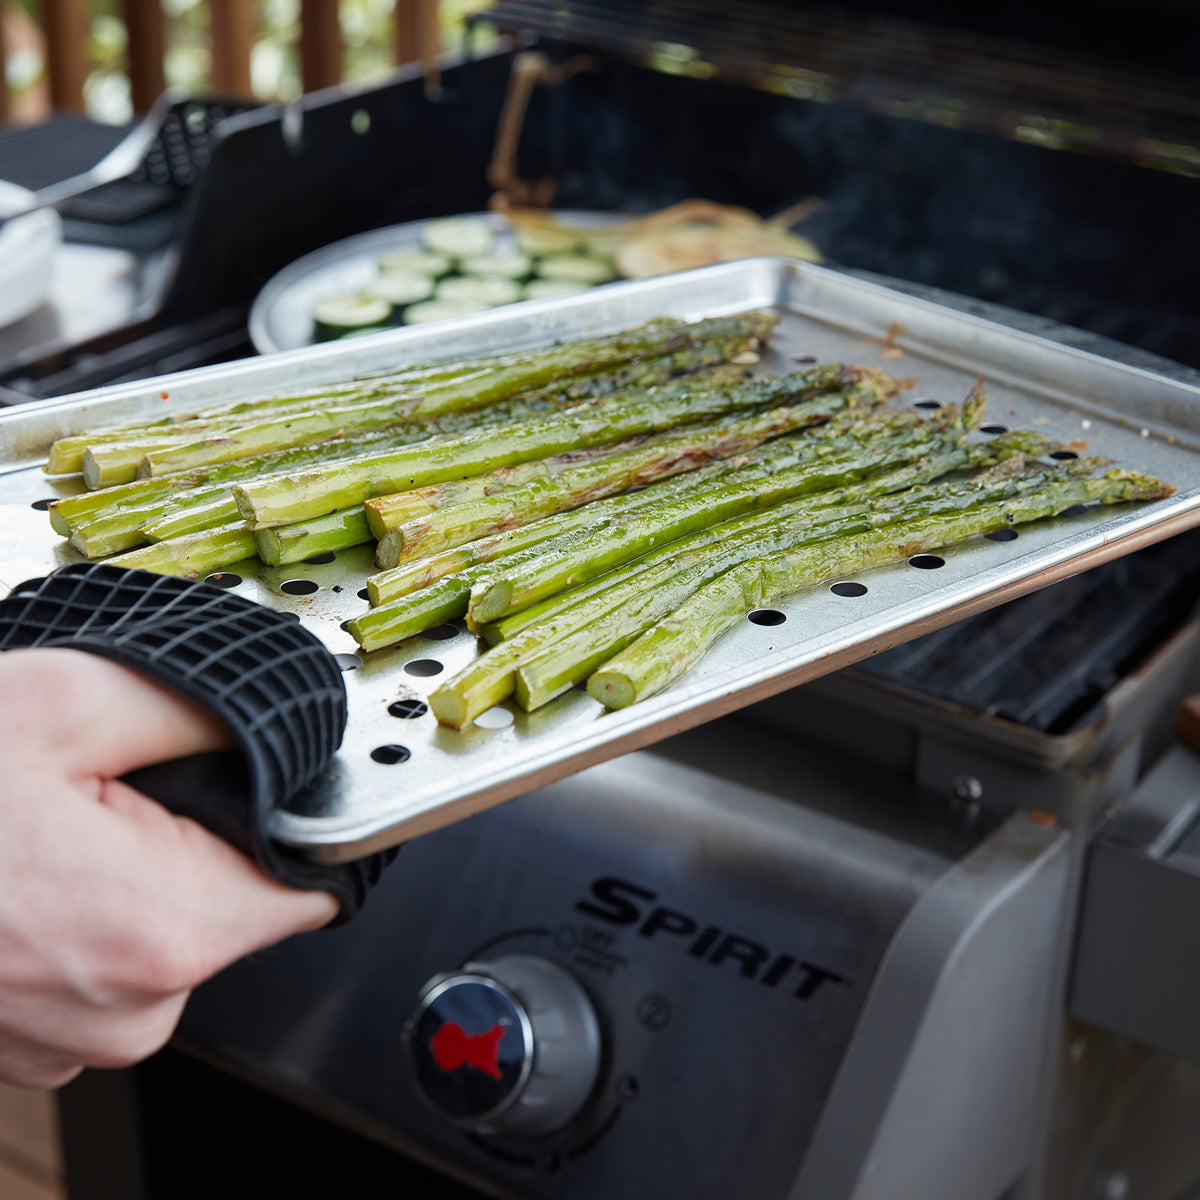 Lifestyle photo, shows asparagus spears fresh off the grill, having been roasted on the medium grill top tray.